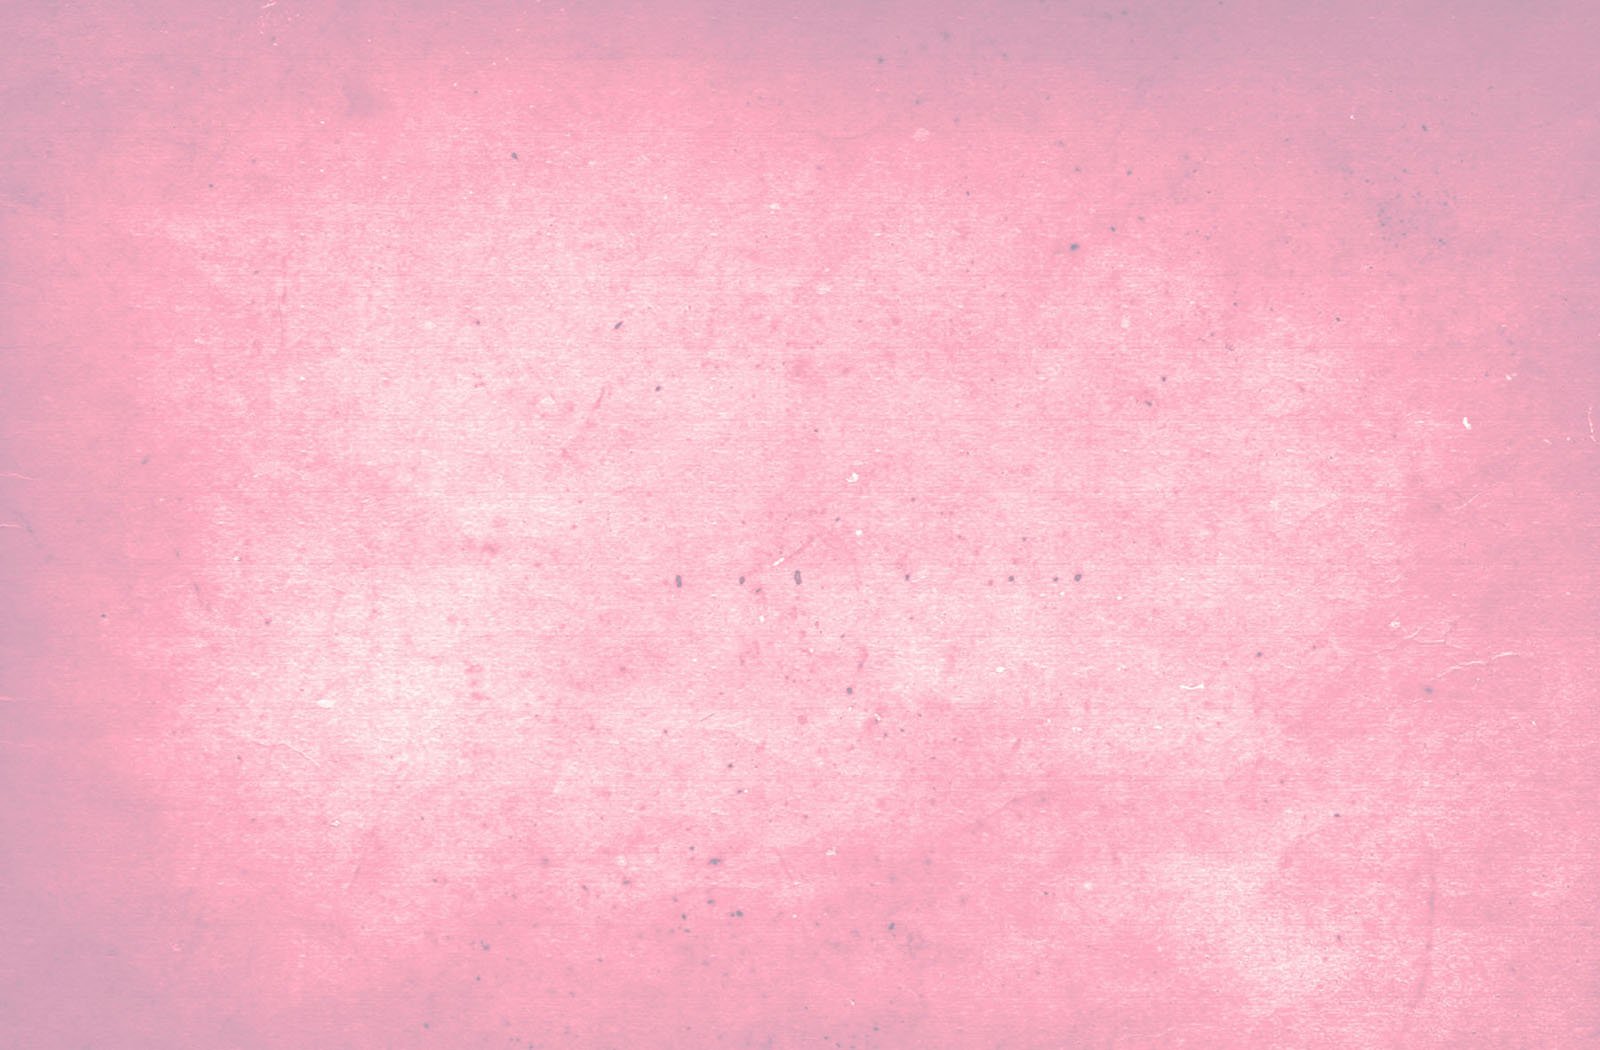  black dots small circles unique background baby pink background